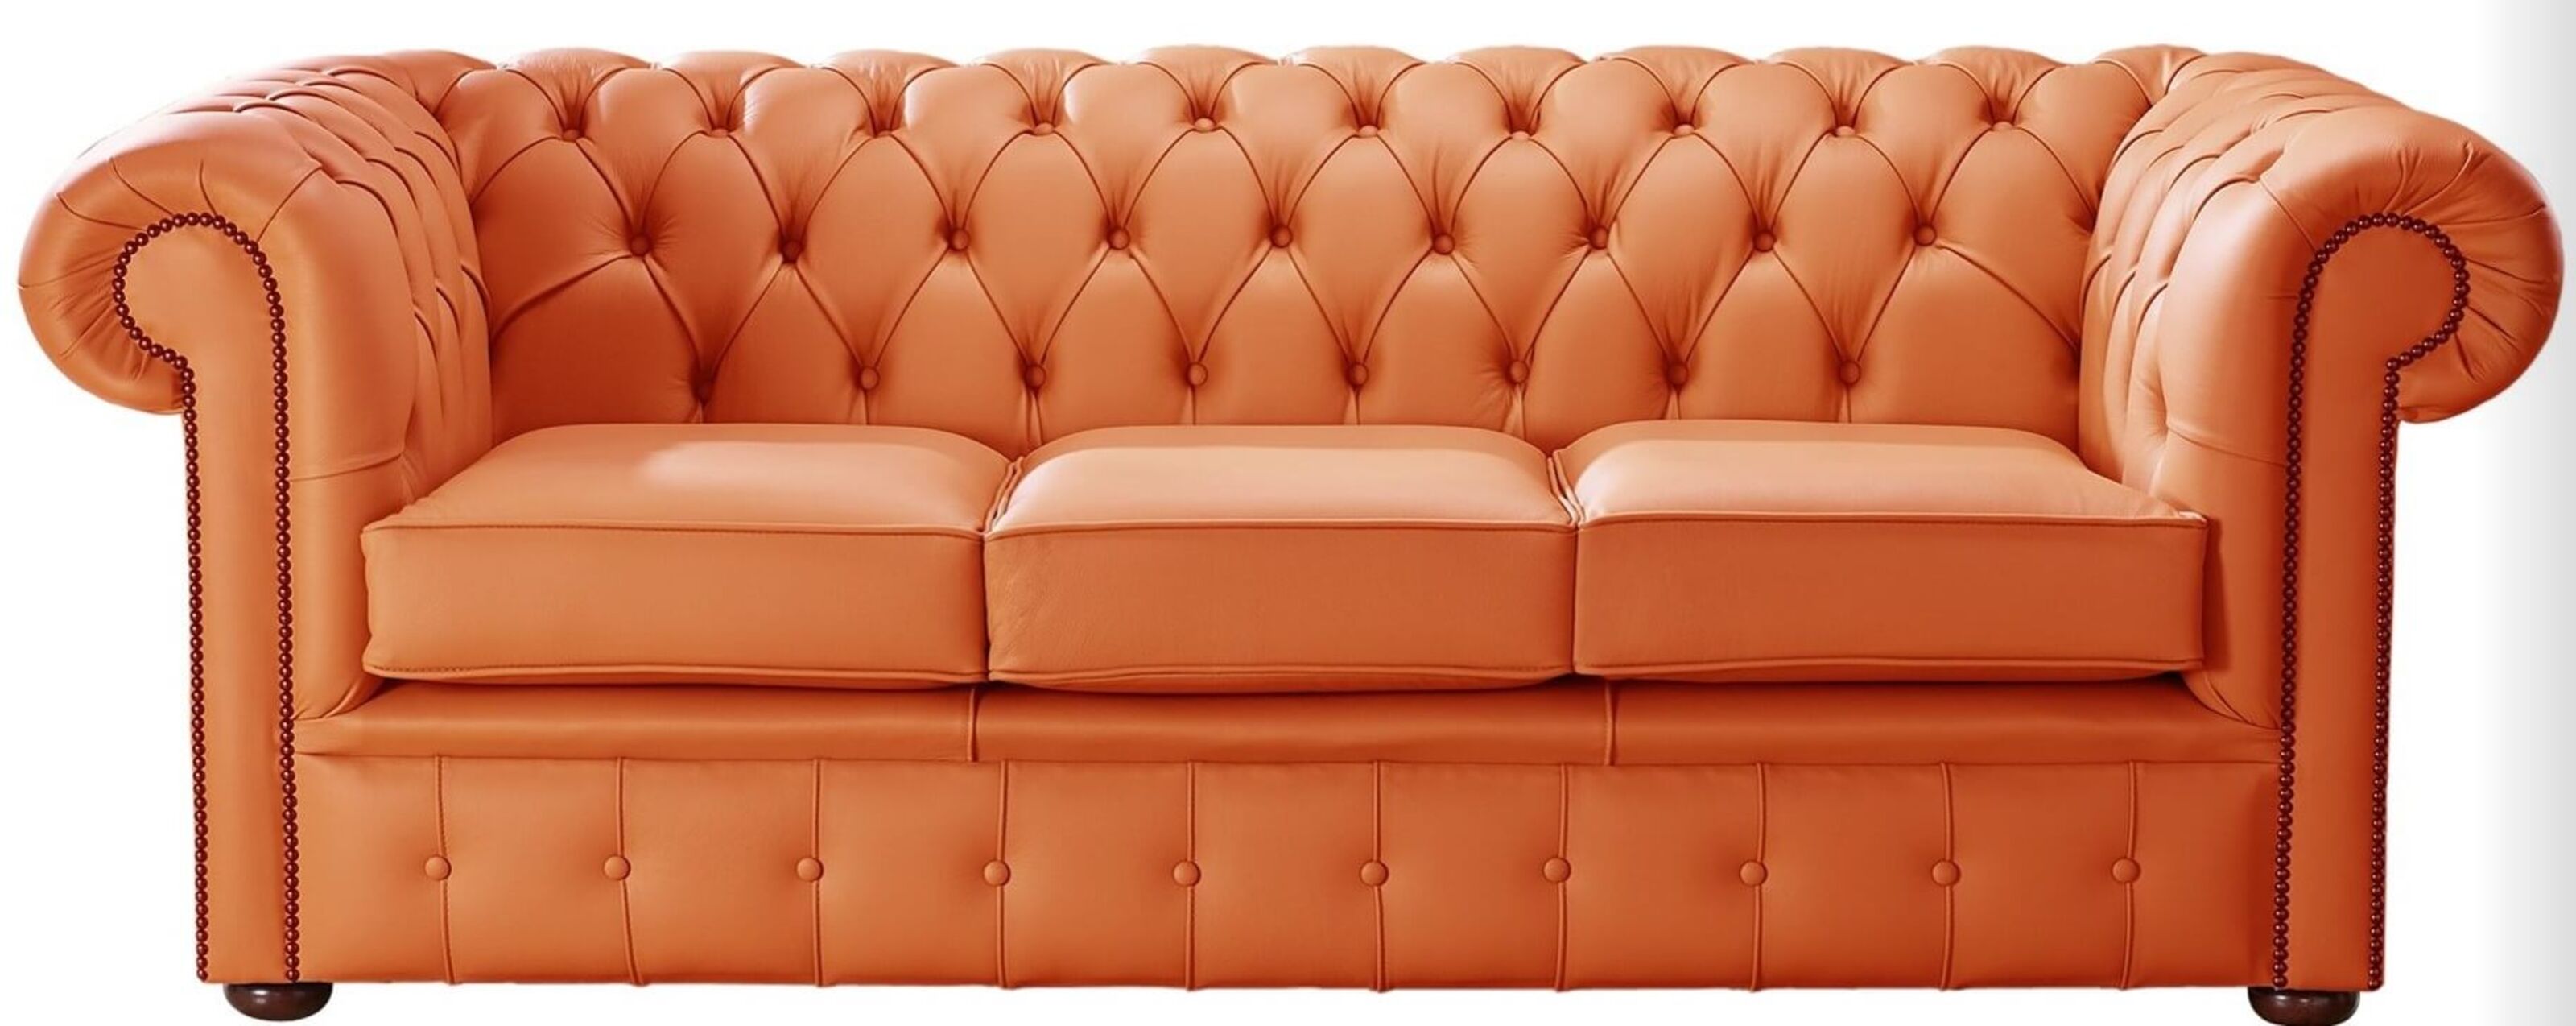 Timeless or Trendy Reassessing the Style Status of Chesterfield Sofas  %Post Title